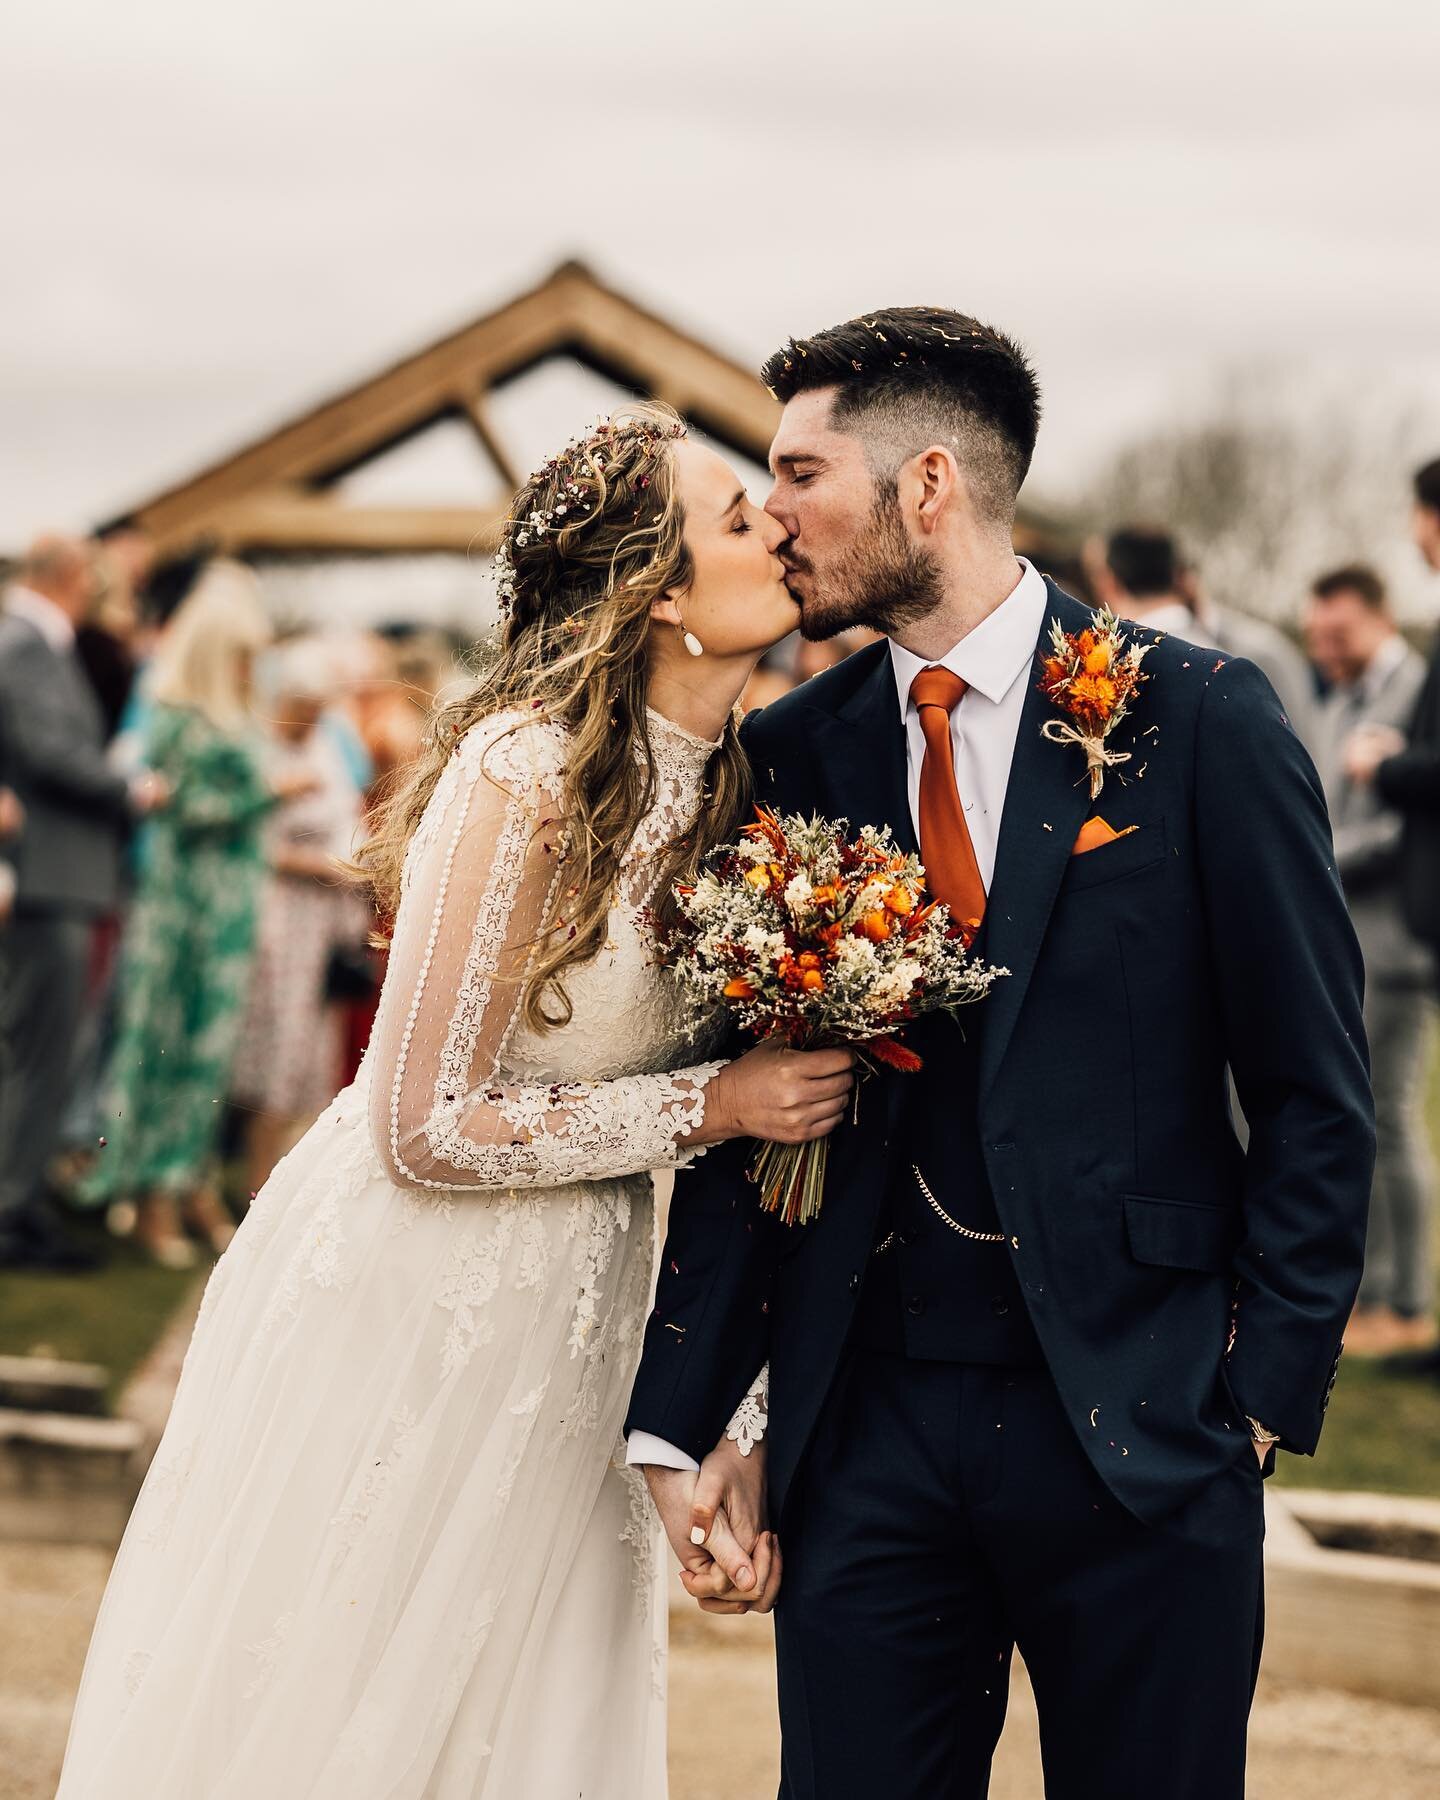 Looking through my favourite photographs from last year is a JOY!!

Excited to show them all in a blog post soon ❤️

P.S. Still got a few spaces available for youd 2024 wedding, message me if you&rsquo;re still looking for that perfect match 😍
-
-
-